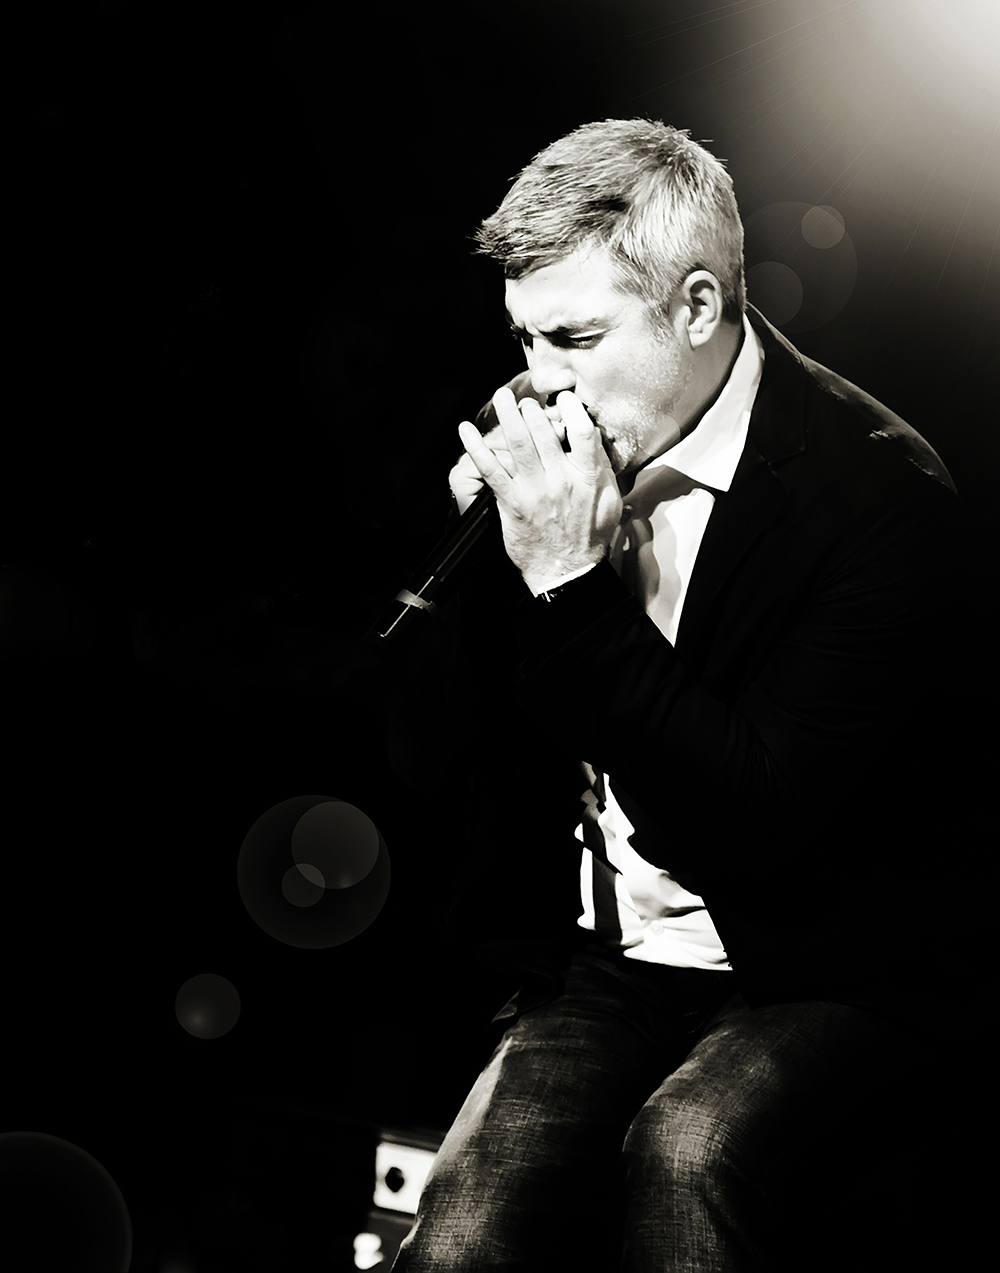 Taylor Hicks has just one concert in Alabama on his fall tour. He’ll play the Lyric Theatre in Birmingham on Oct. 28.